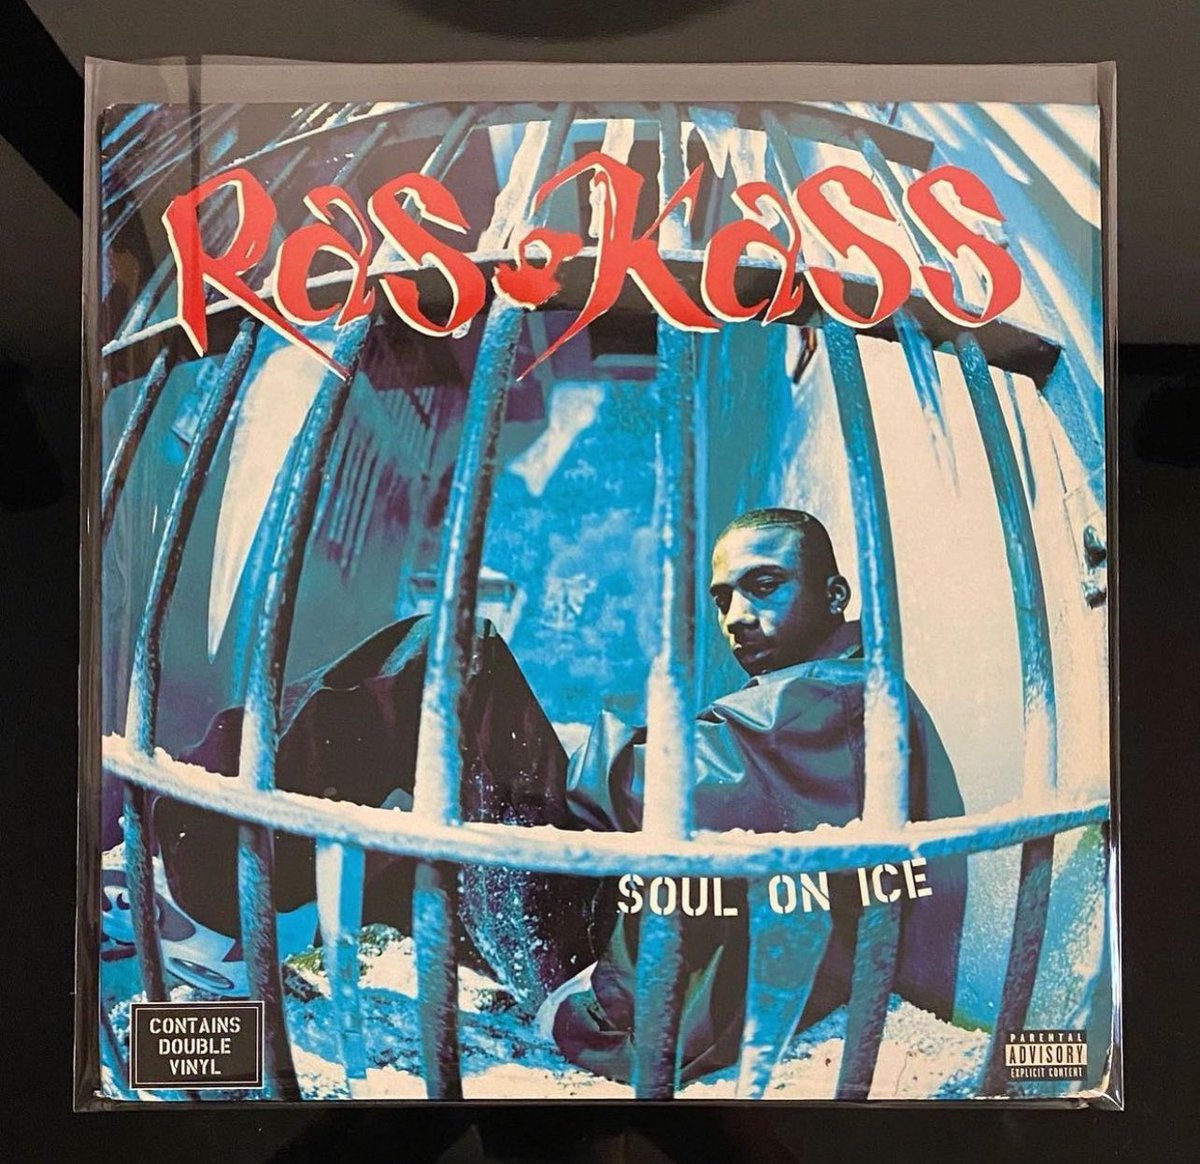 Ras Kass “Soul on Ice” 1996 Original Press Released 27 years ago today